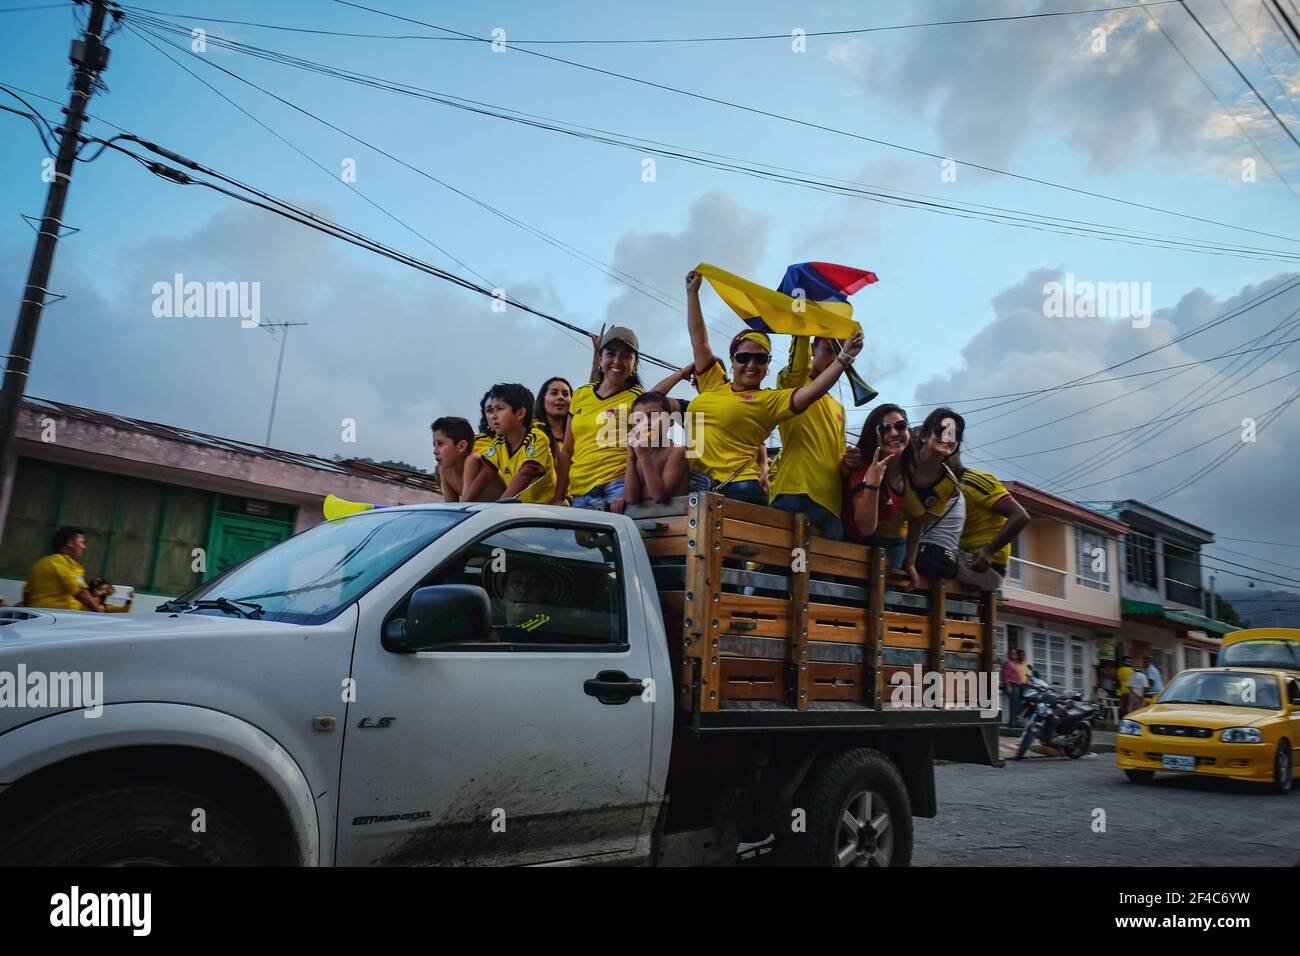 Colombians in Libano, Tolima, celebrate after the national soccer team won a game. Stock Photo